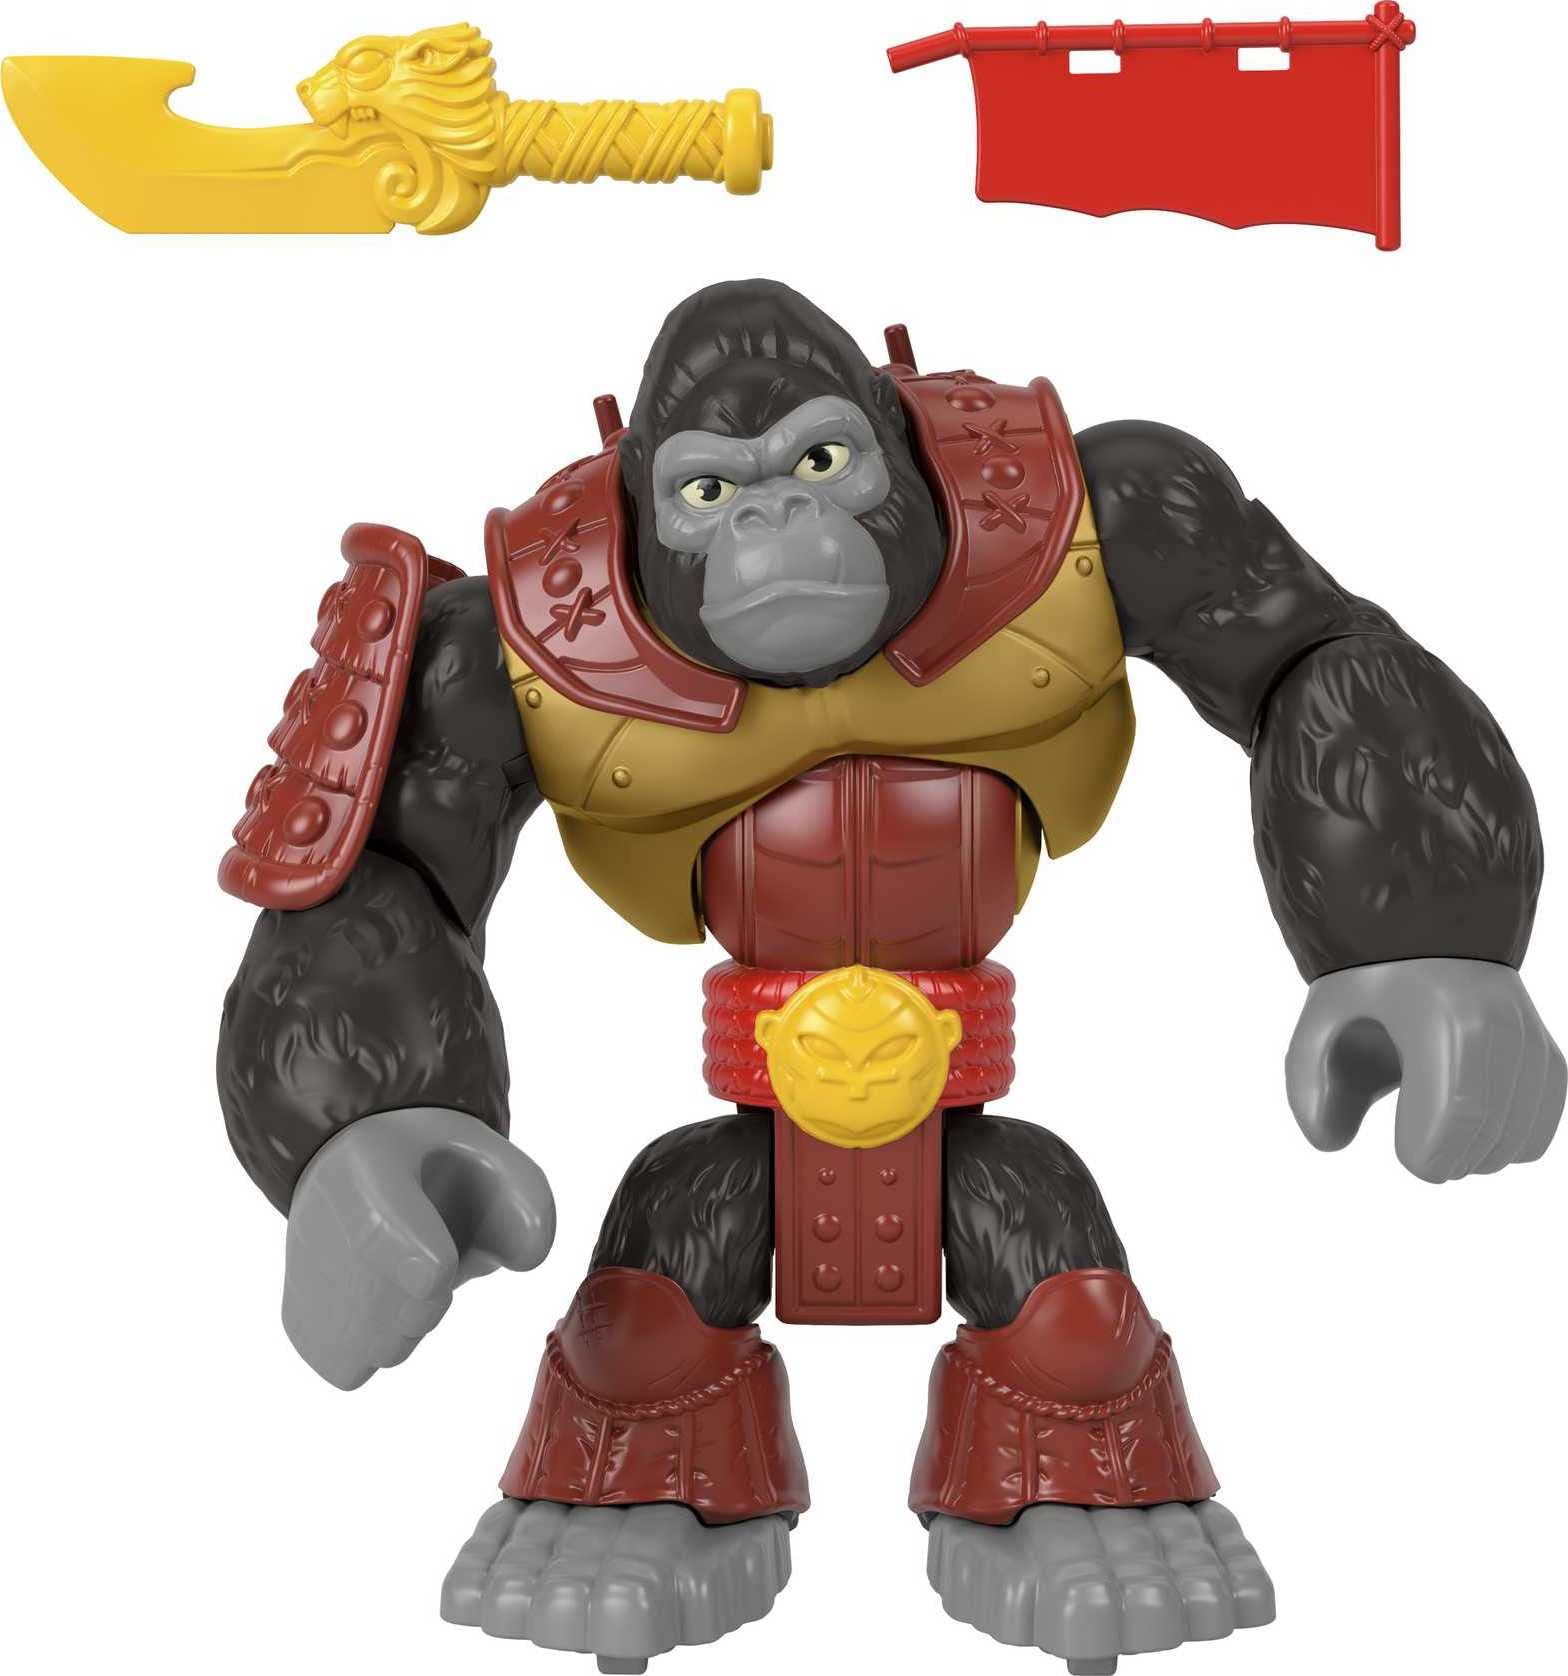 Imaginext Preschool Toy Silverback Gorilla Smash 8-In Figure with Punching Action & Accessories for Pretend Play Ages 3+ Years (Amazon Exclusive)